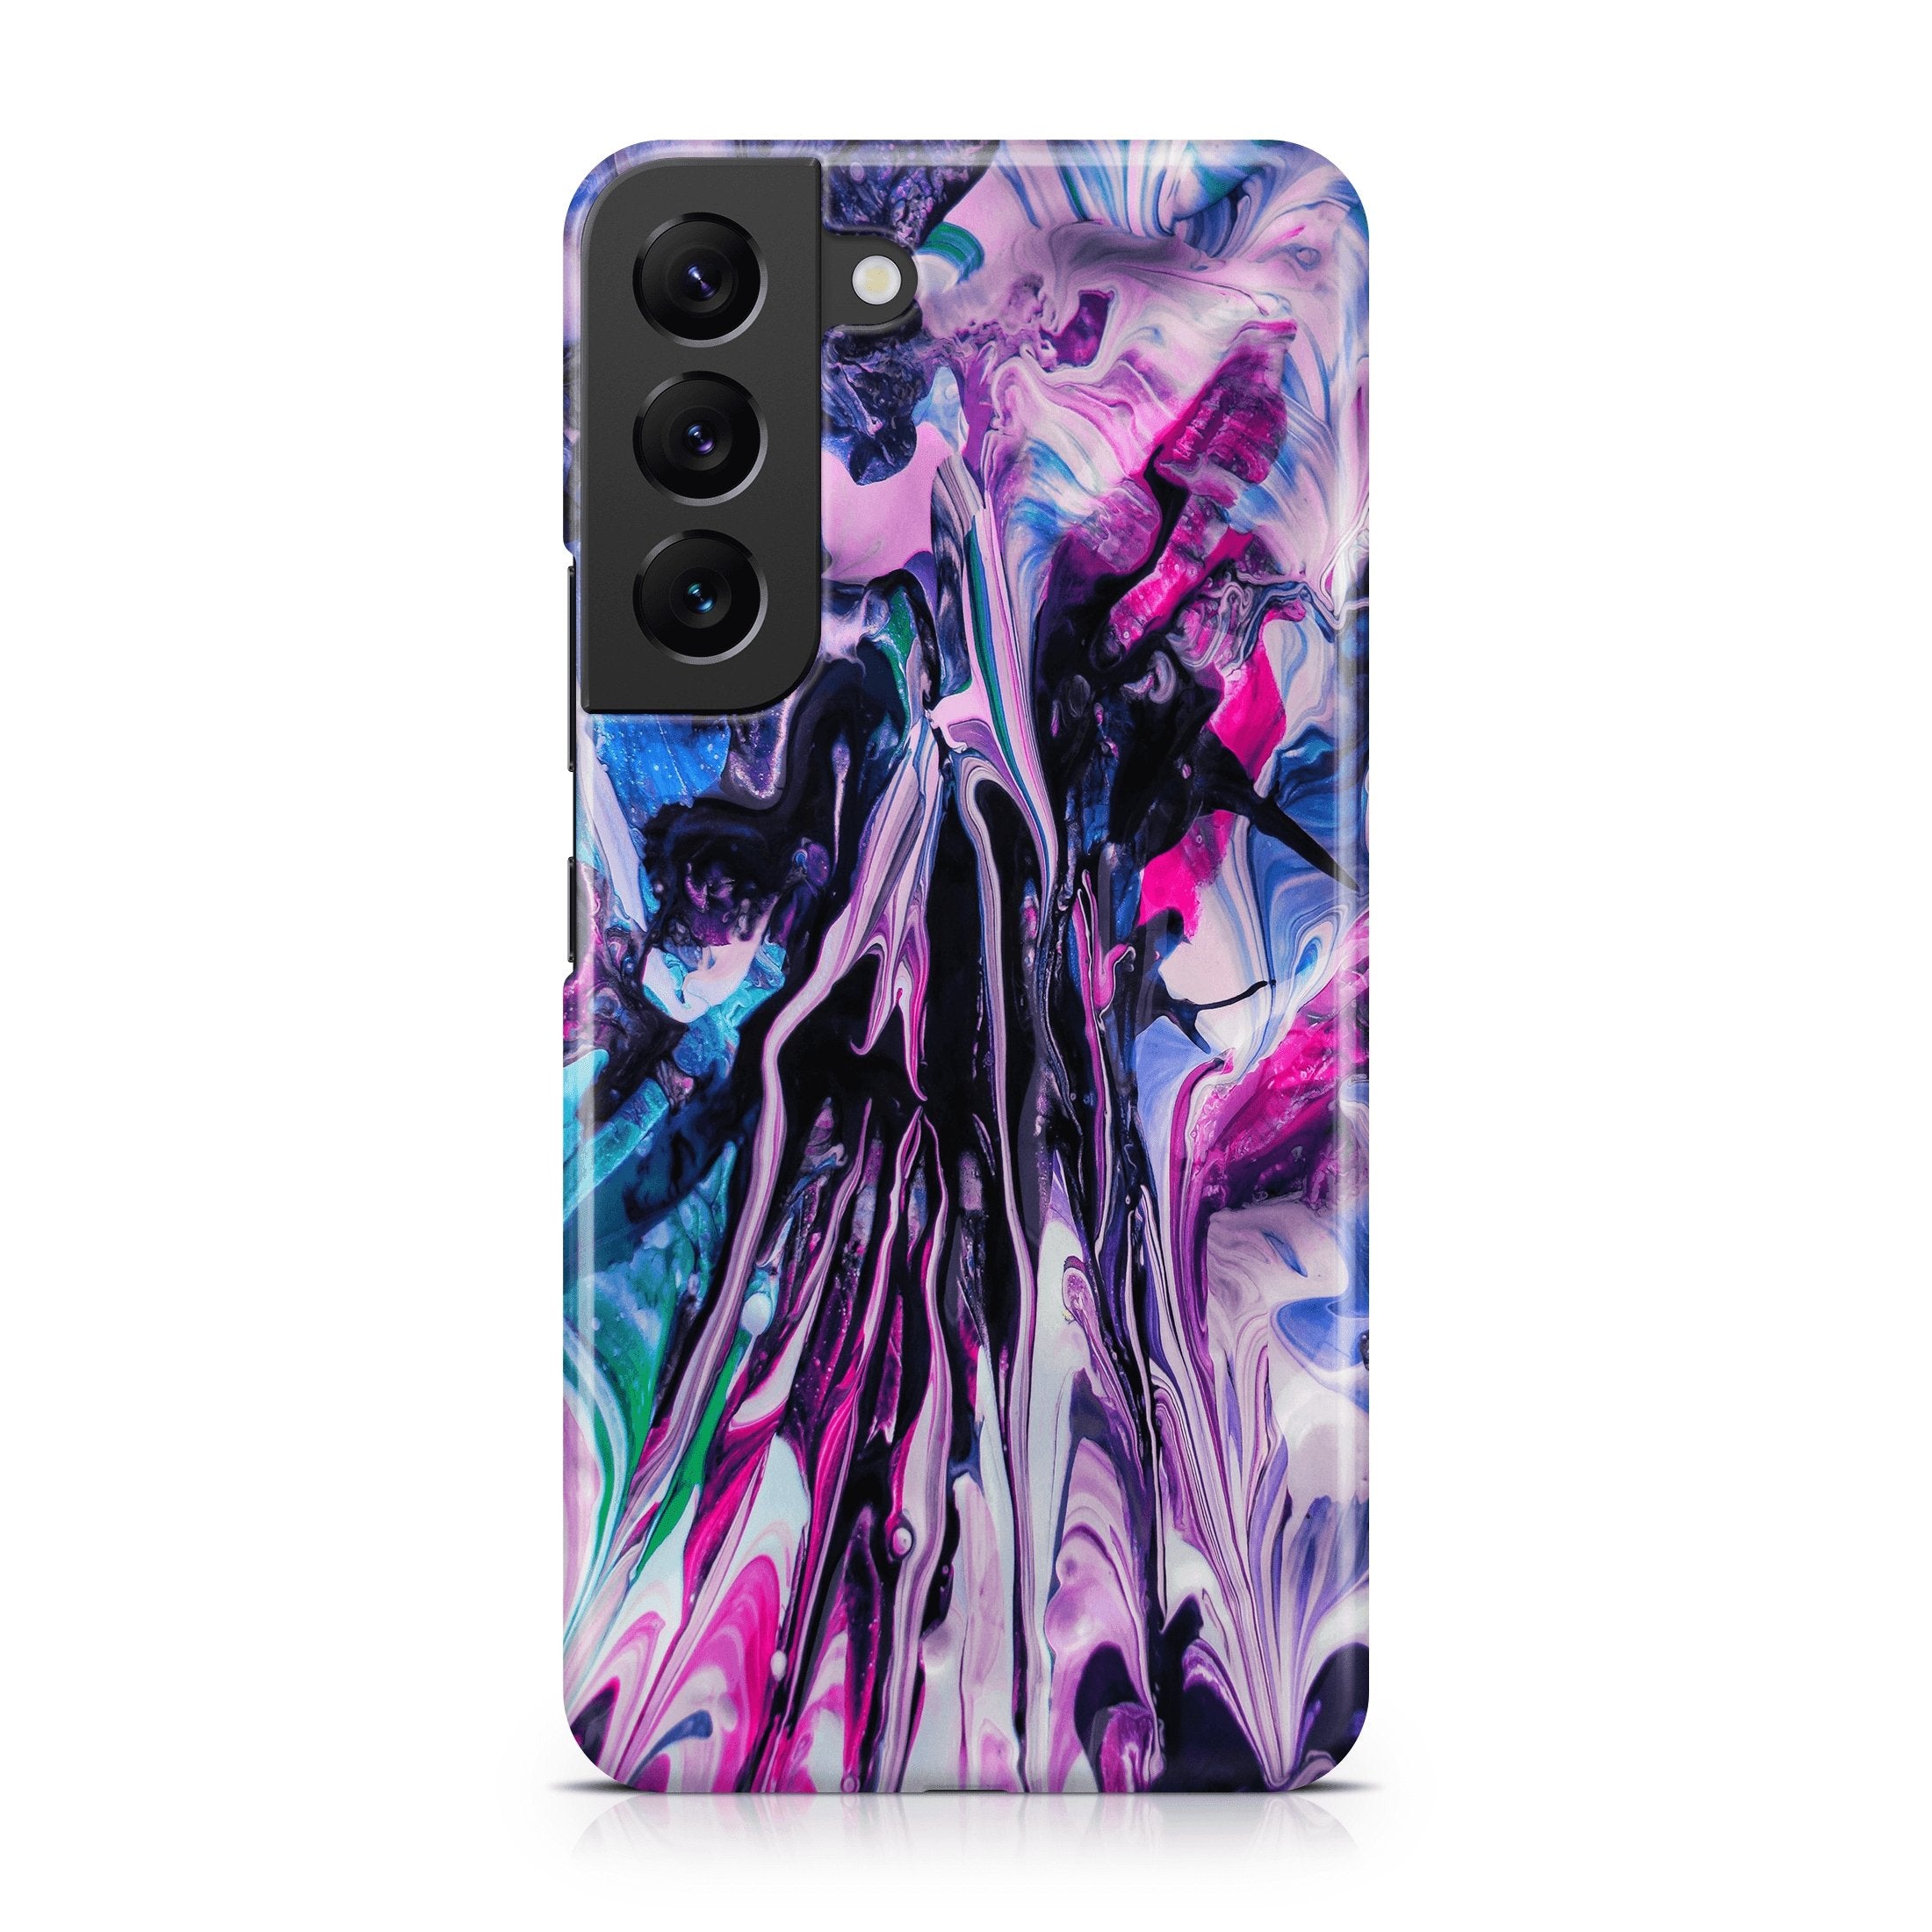 Fluid Acrylic Chaos - Samsung phone case designs by CaseSwagger